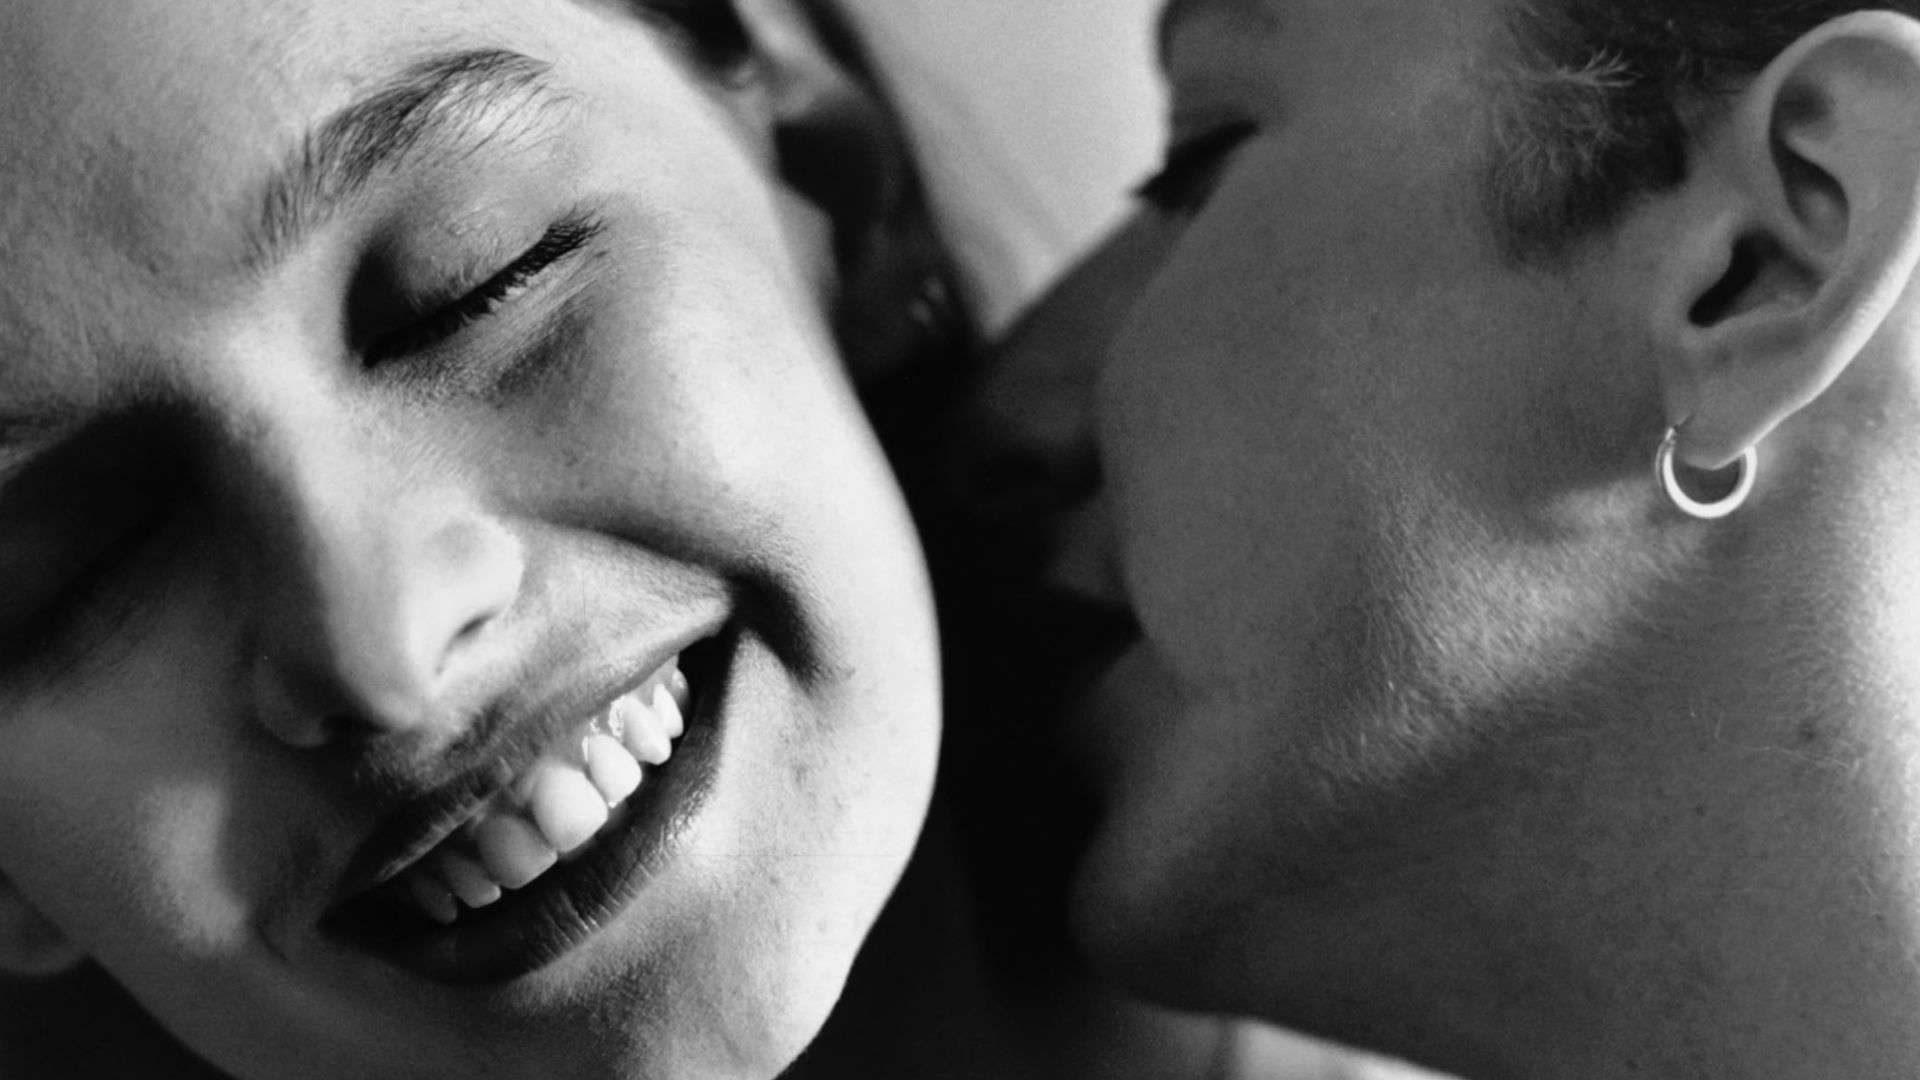 A close-up black and white photo of a woman kissing another woman’s neck in this image from The Samuel Goldwyn Company.